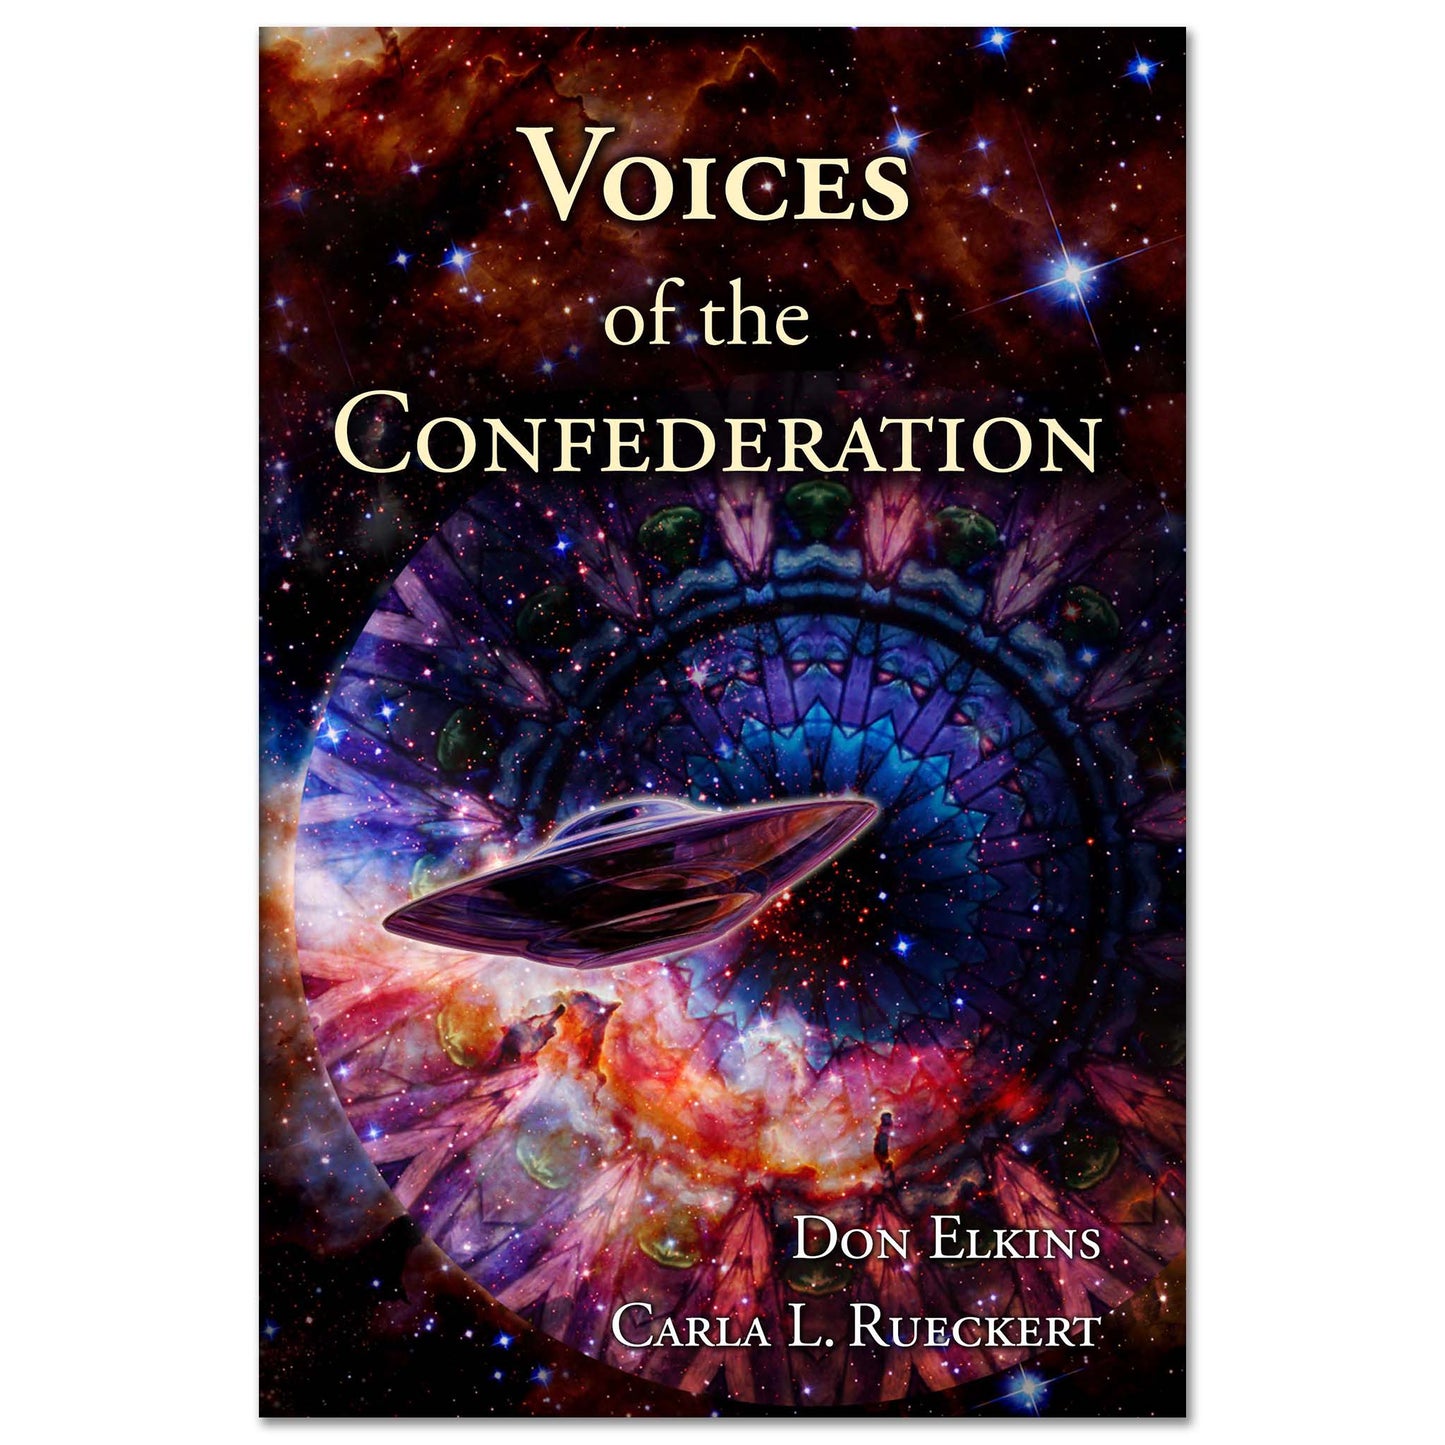 Voices of the Confederation